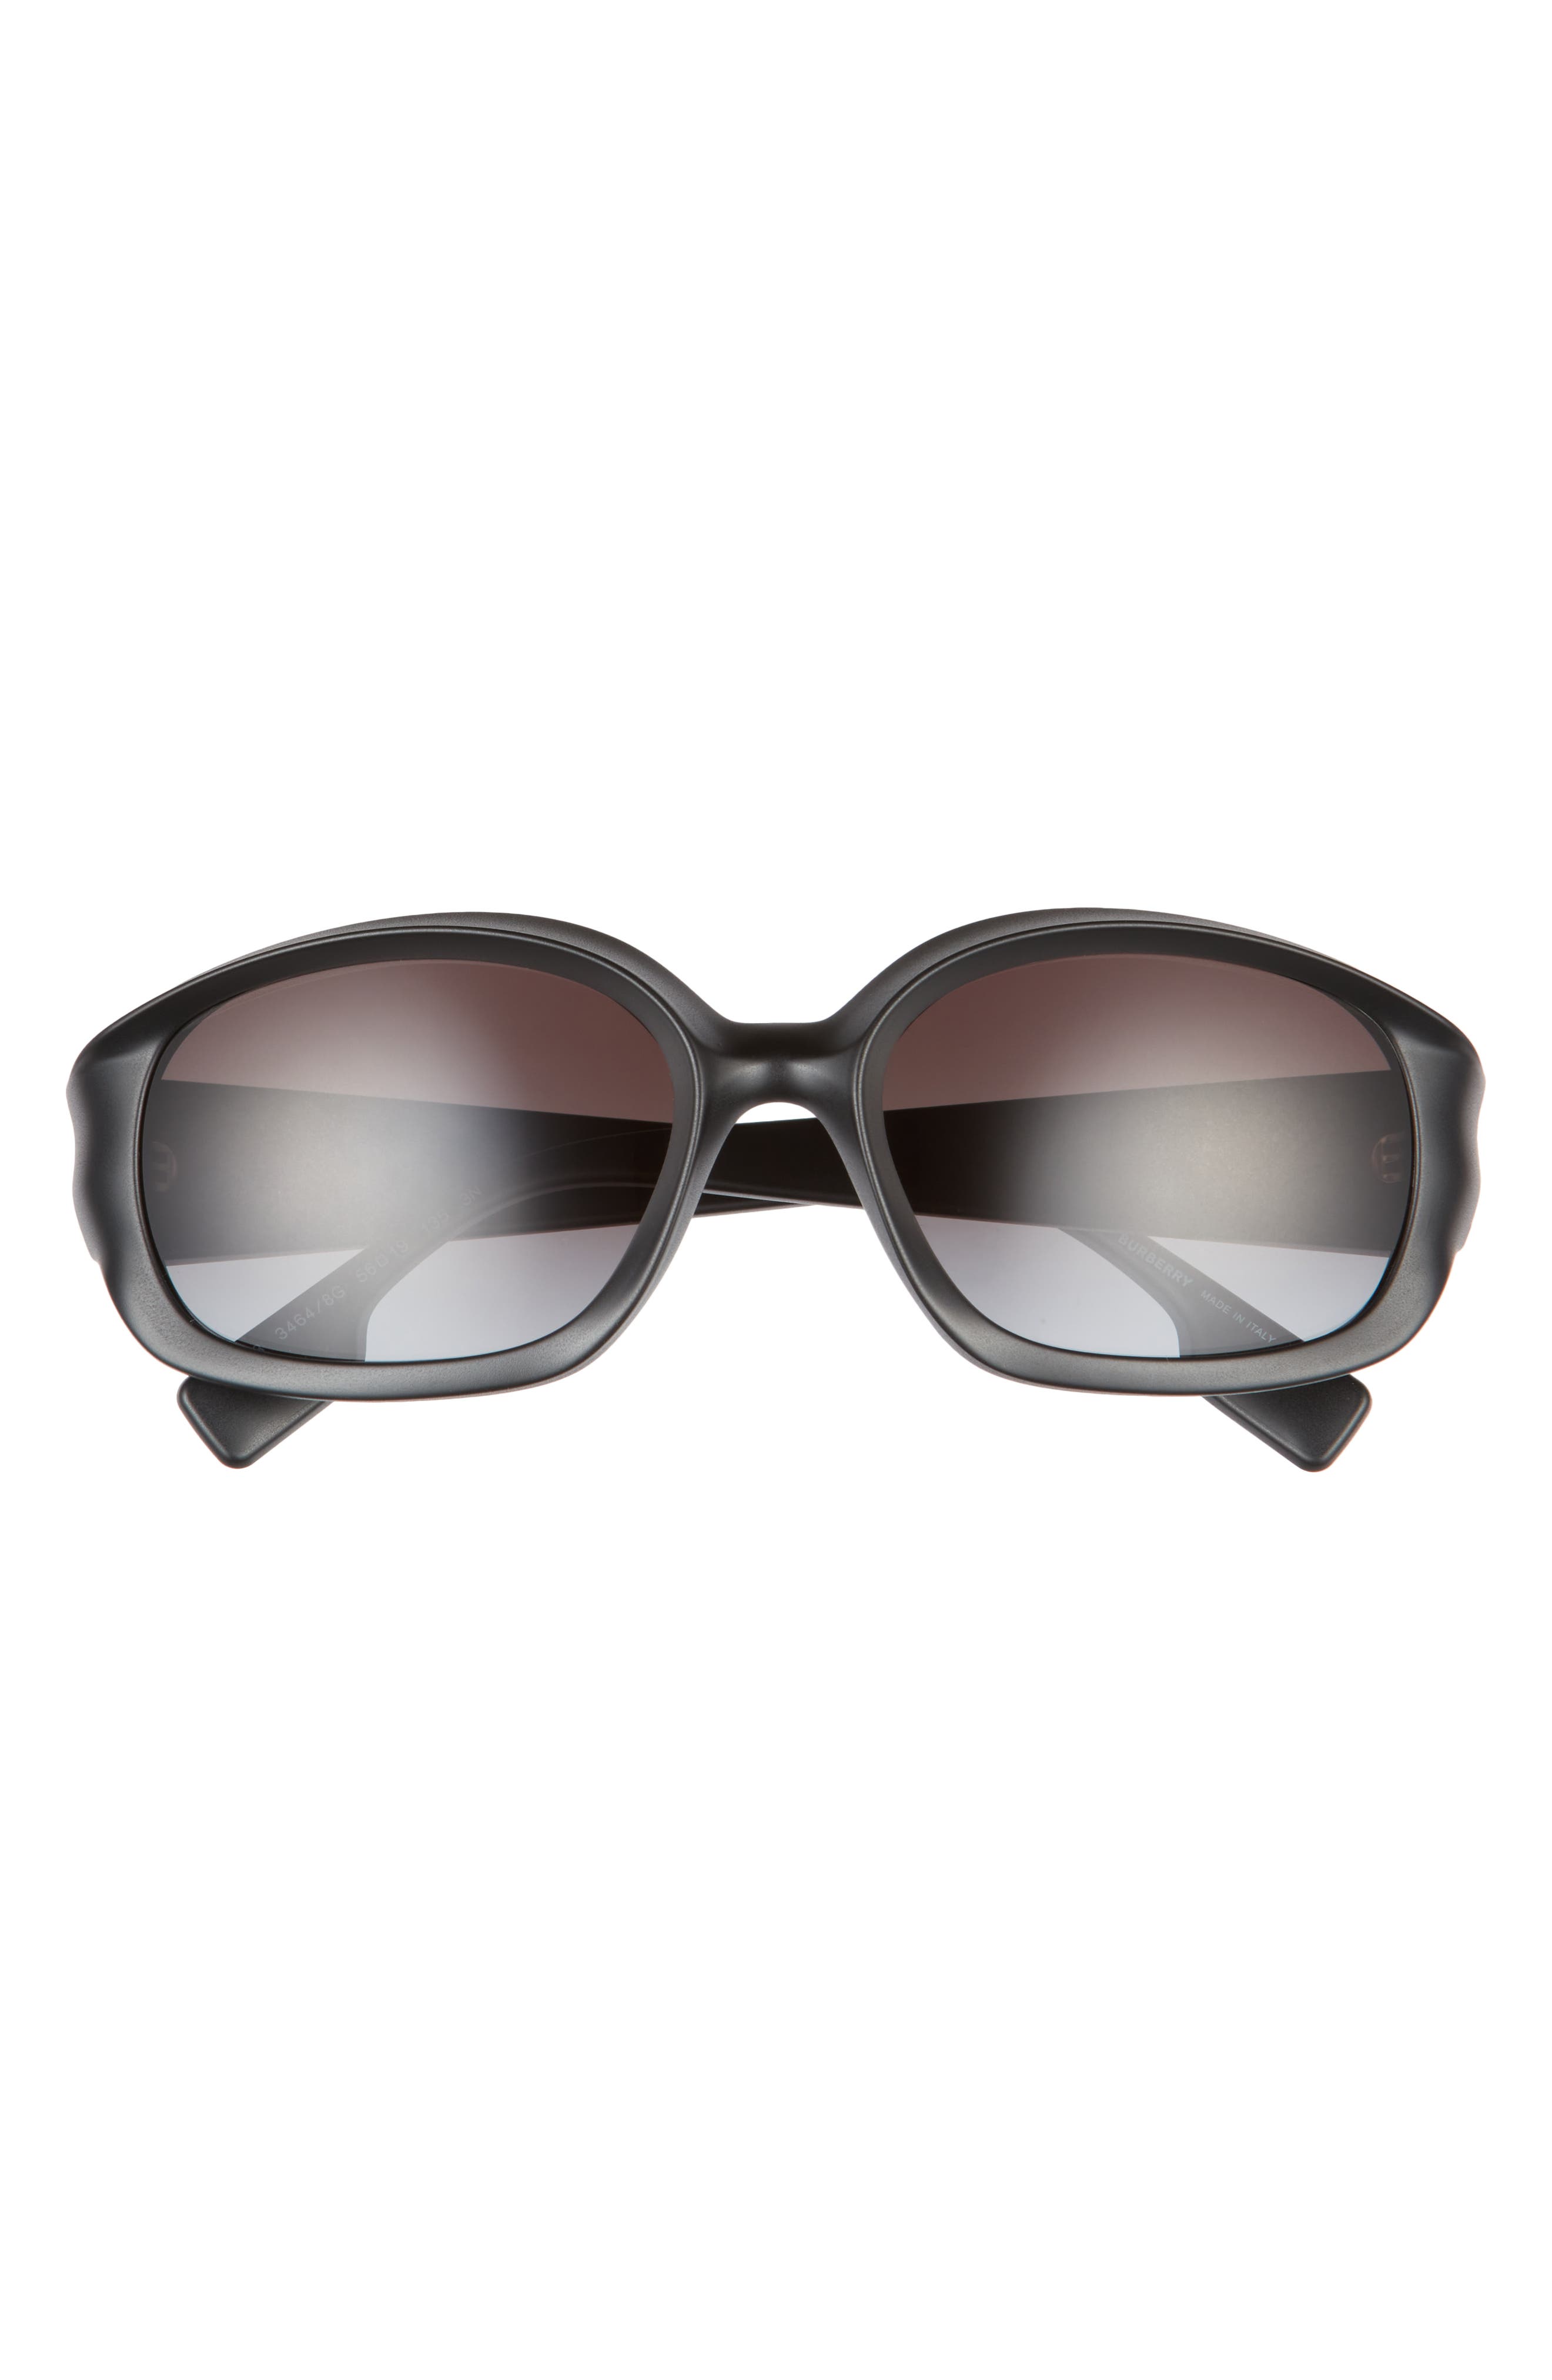 Burberry 56mm Gradient Oval Sunglasses in Black/Grey Gradient at Nordstrom